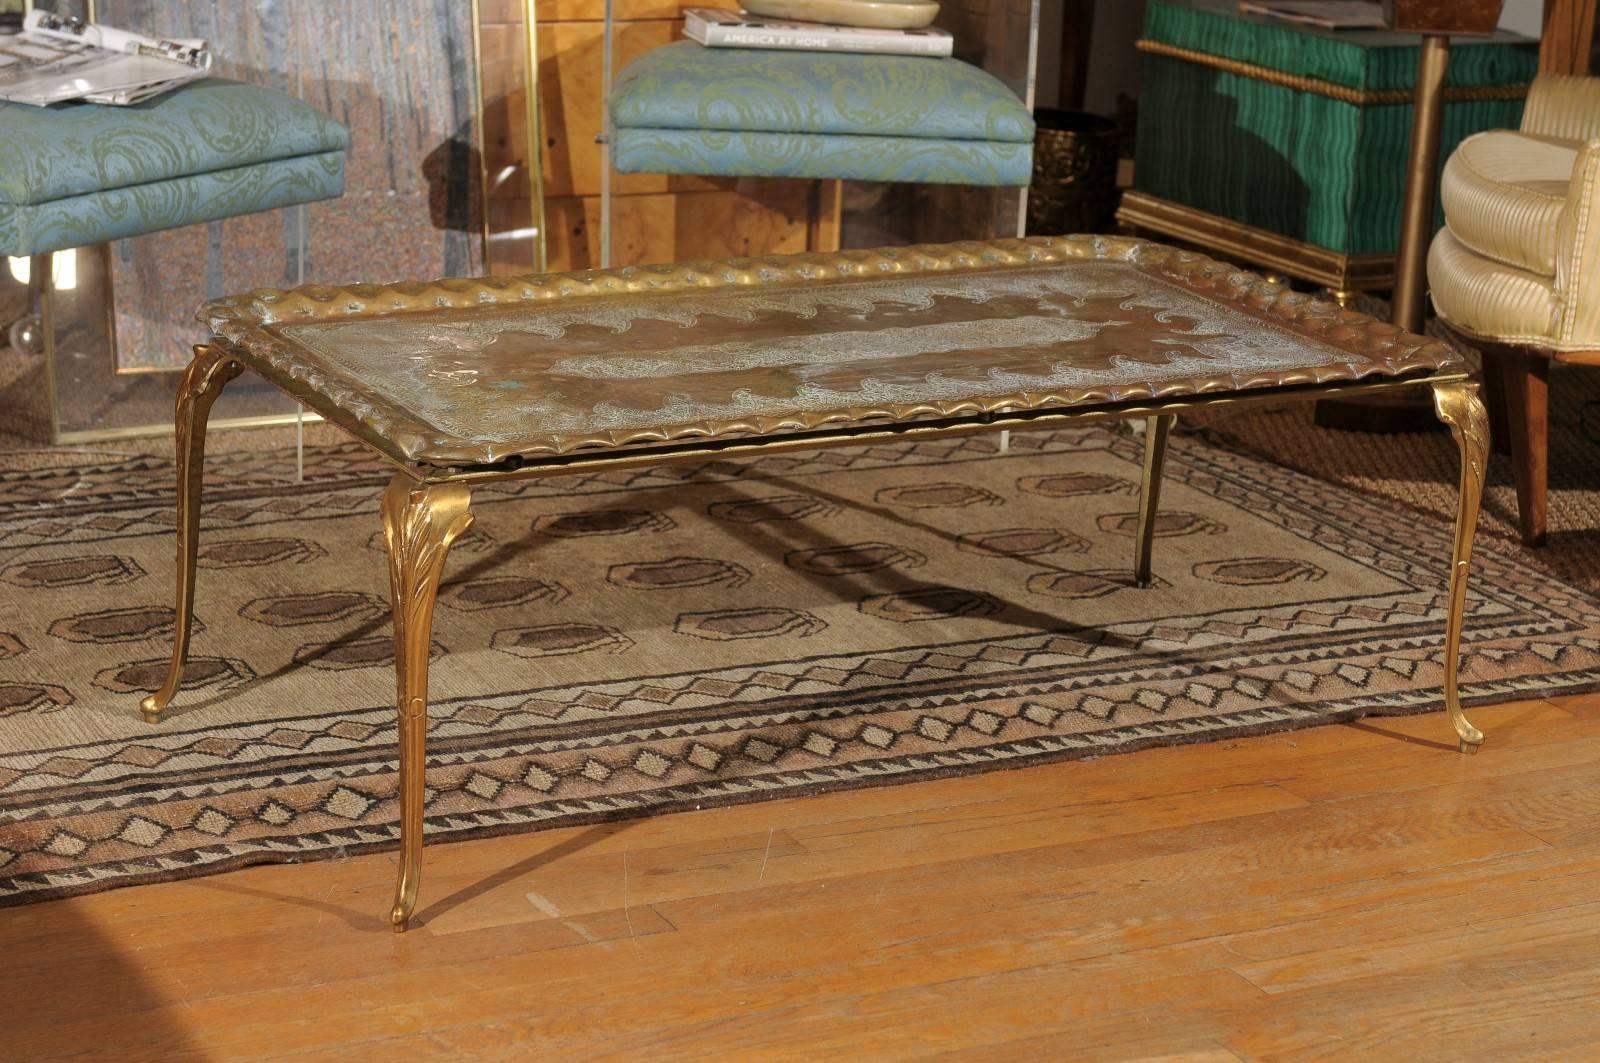 Mid-20th century etched and hammered rectangular oversized brass tray resting on a solid brass stand with cabriole legs.